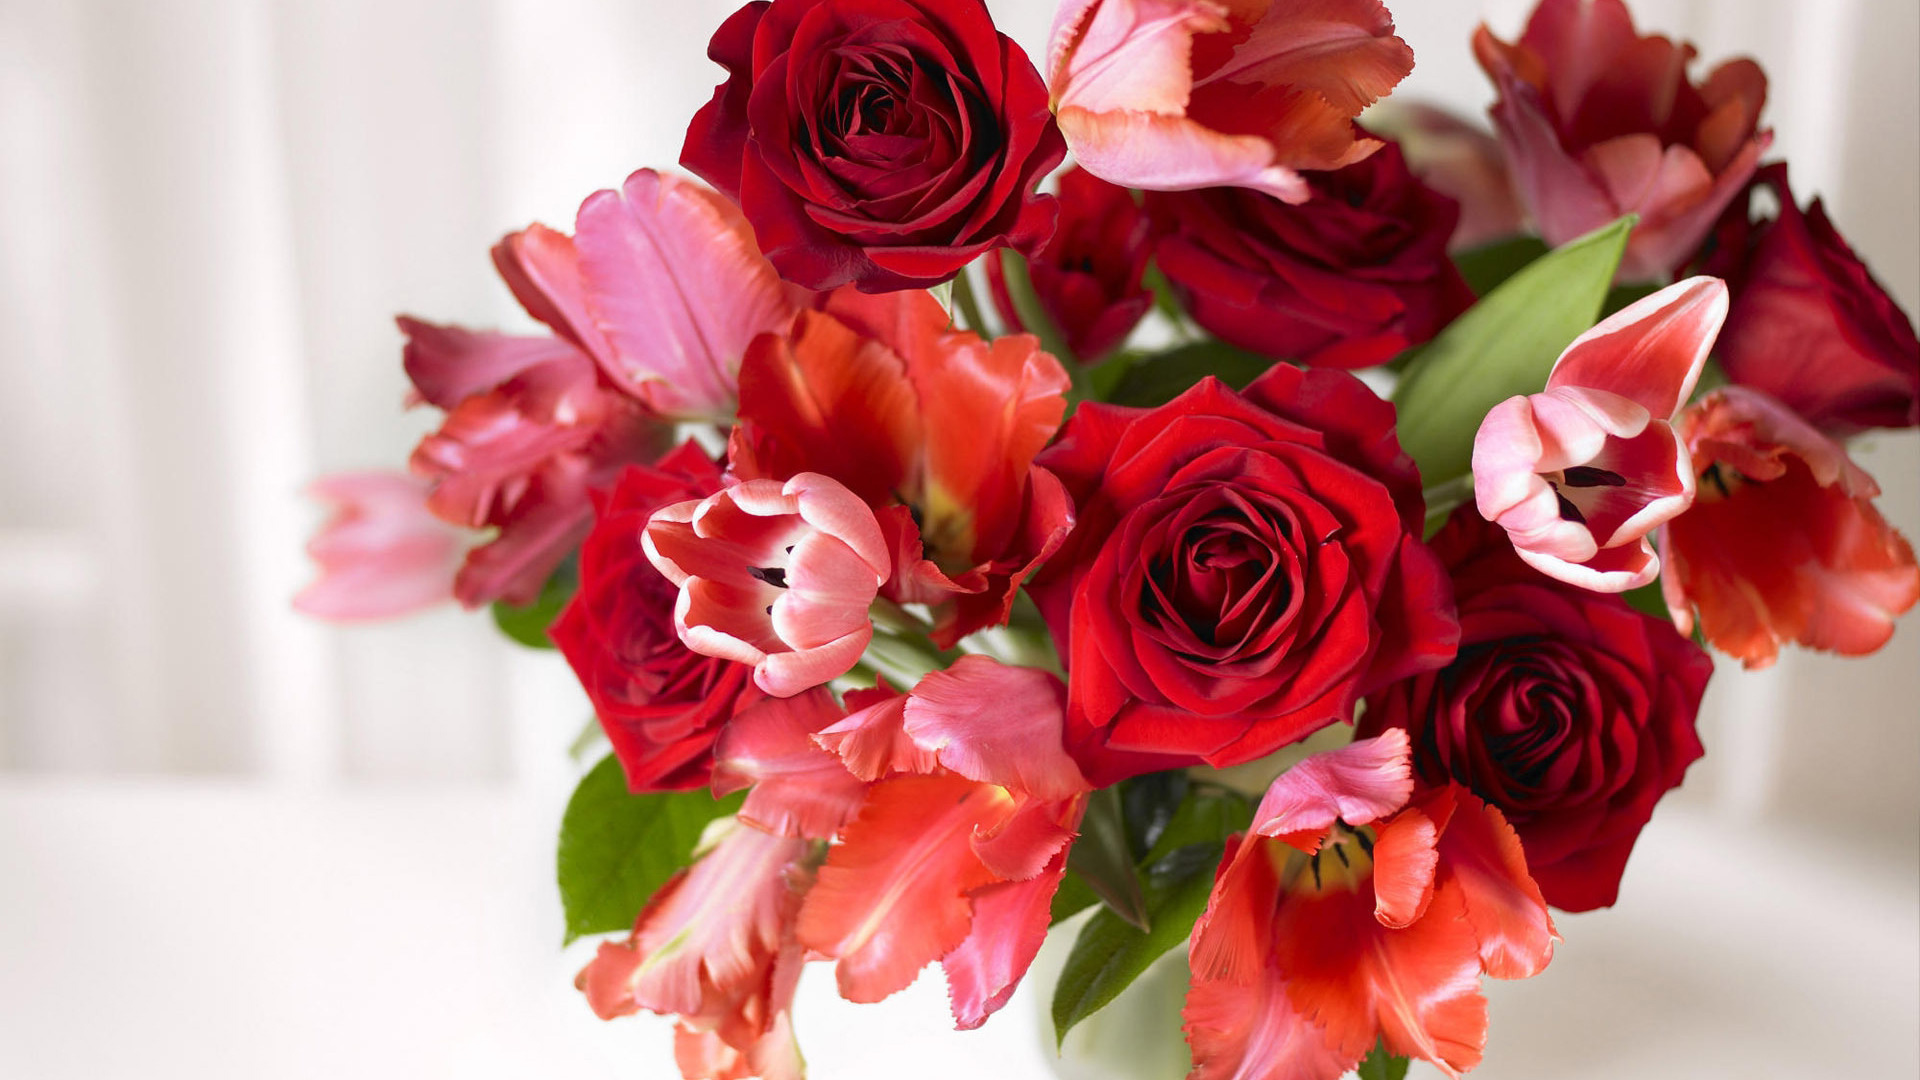 Flowers And Rose Image - Flowers Nice - HD Wallpaper 